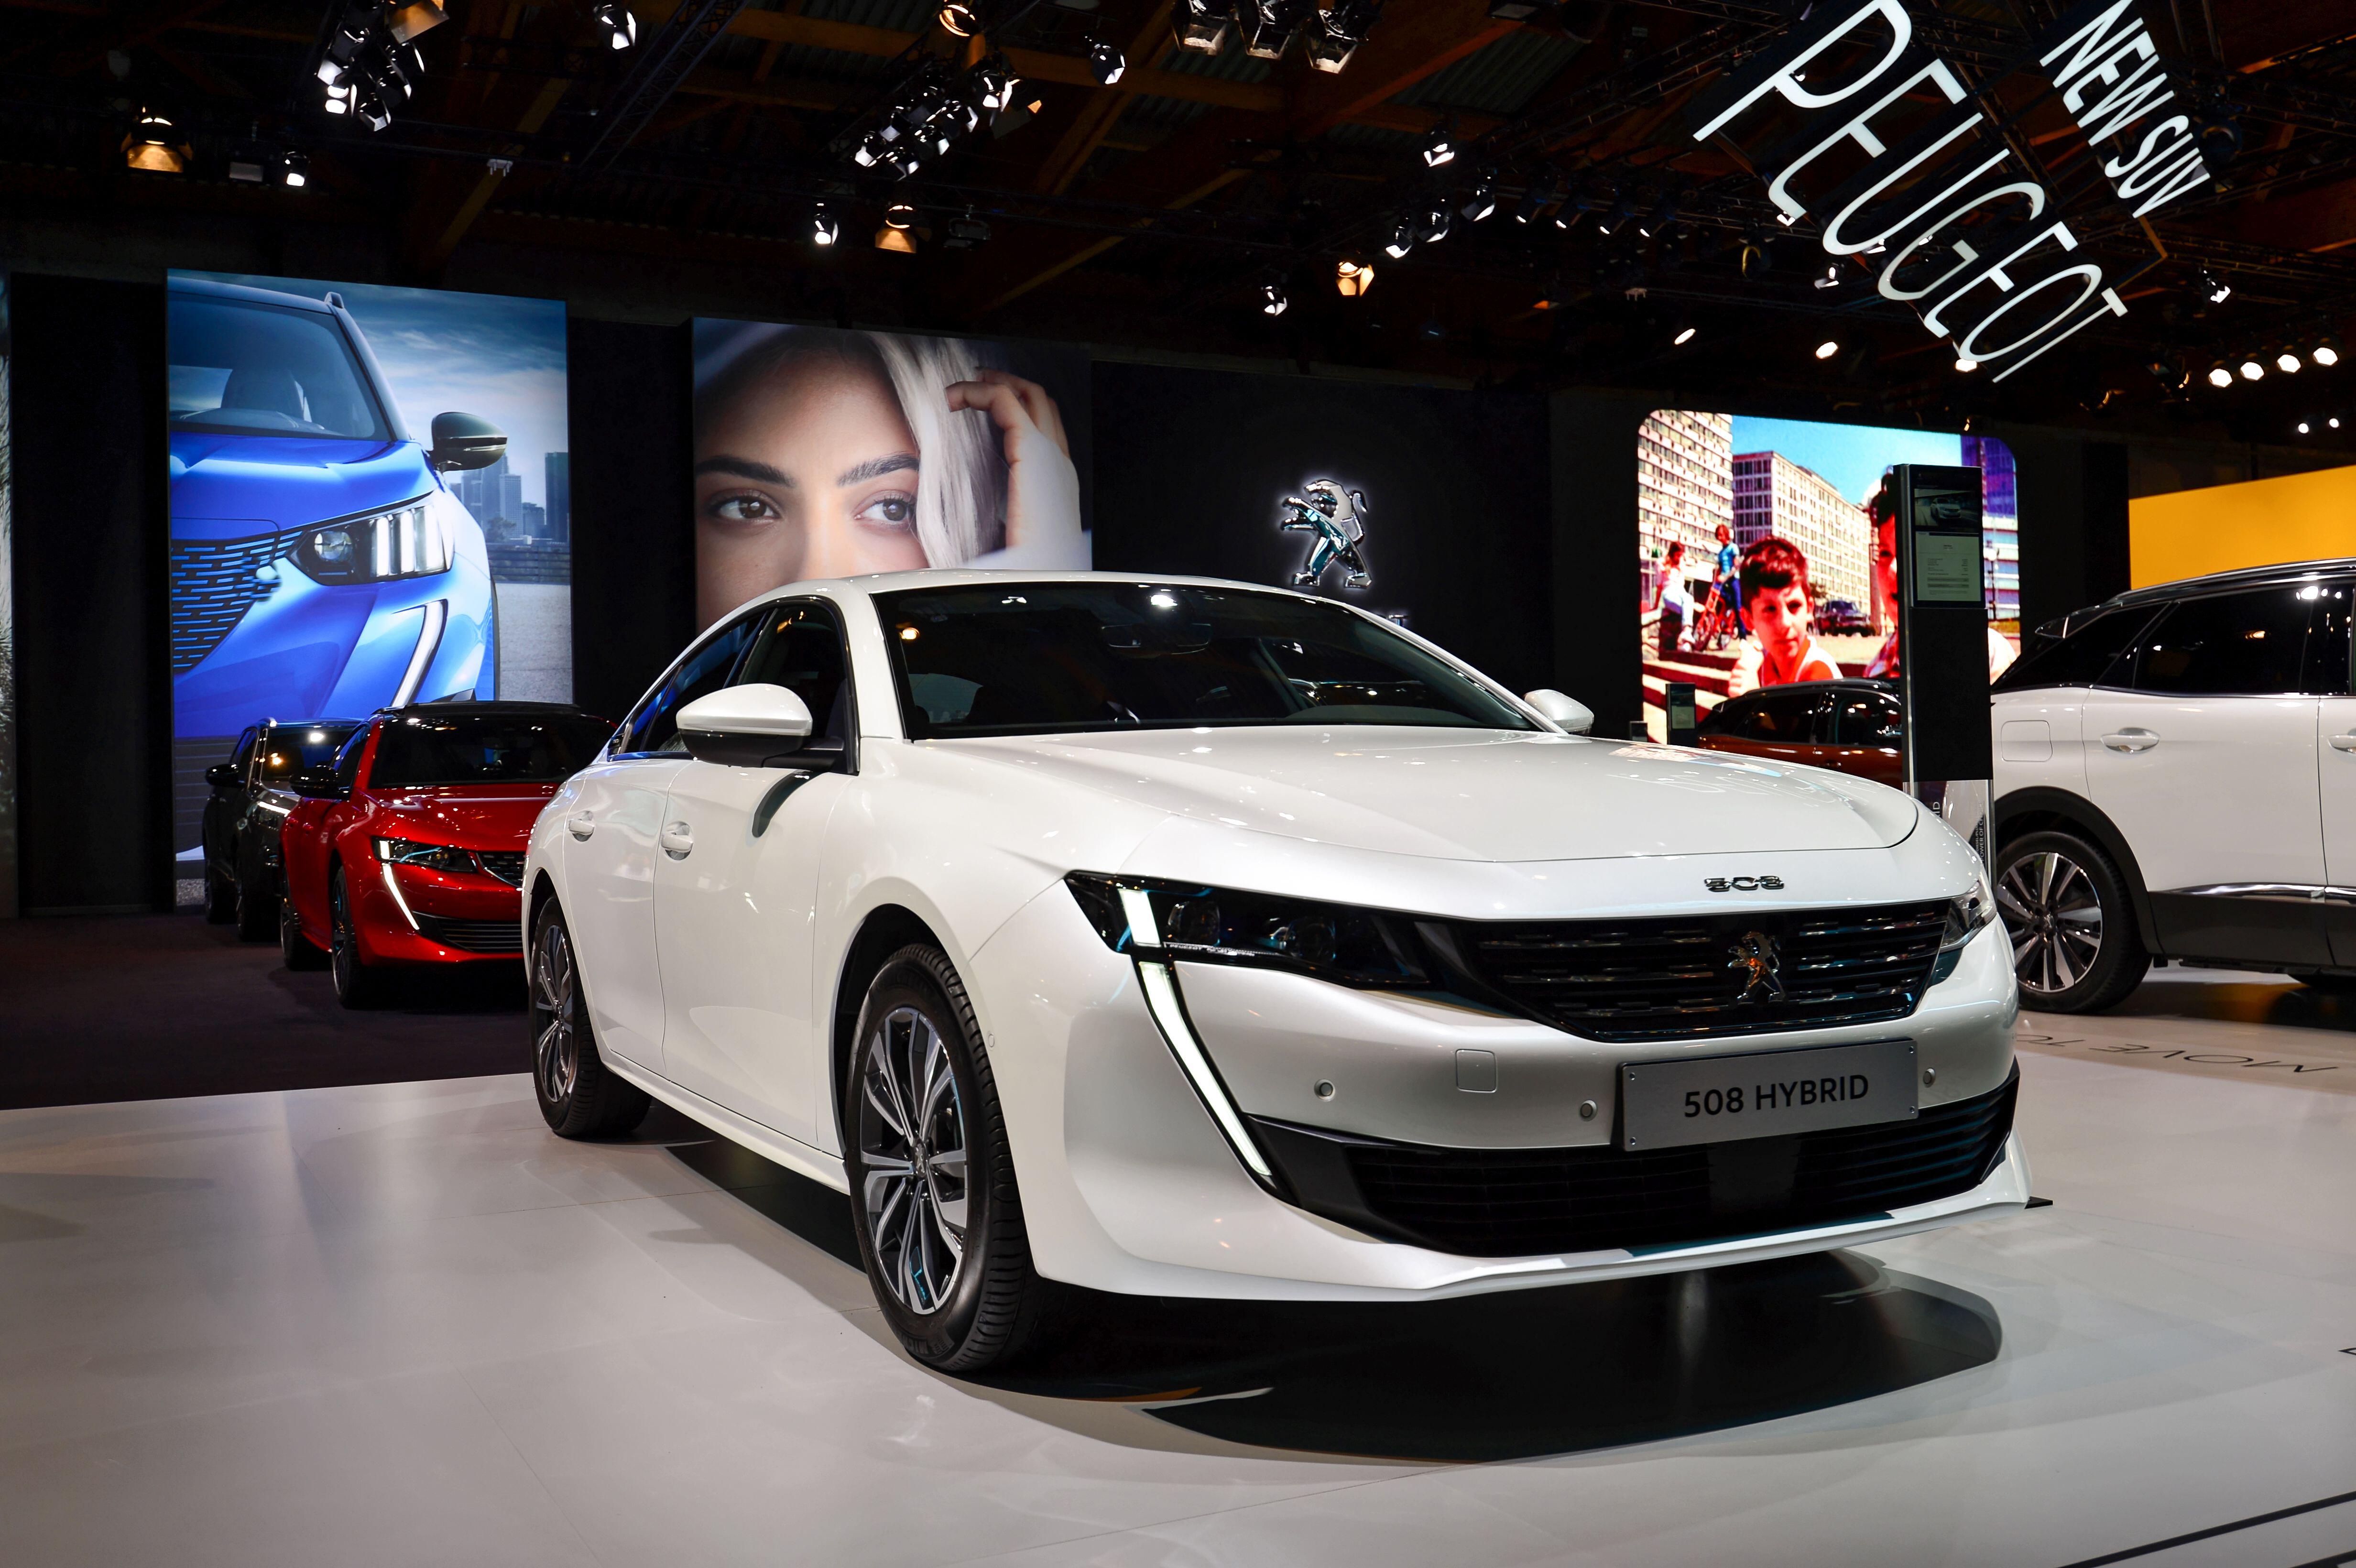 The expert said the Peugeot 508 was an option if you are looking for a spacious saloon